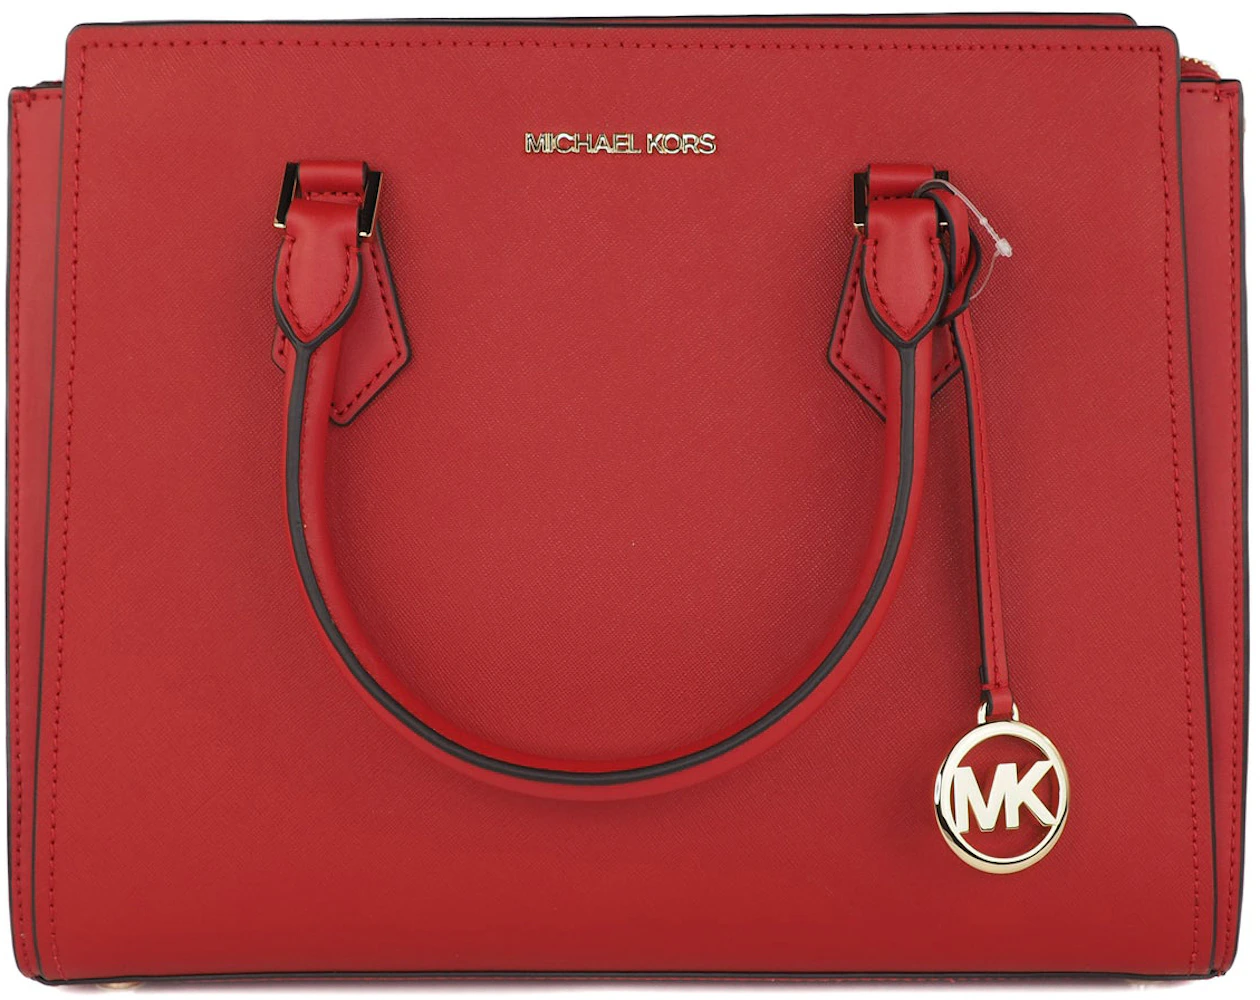 Michael Kors Hope Satchel Bag Large Flame Red in Saffiano Leather